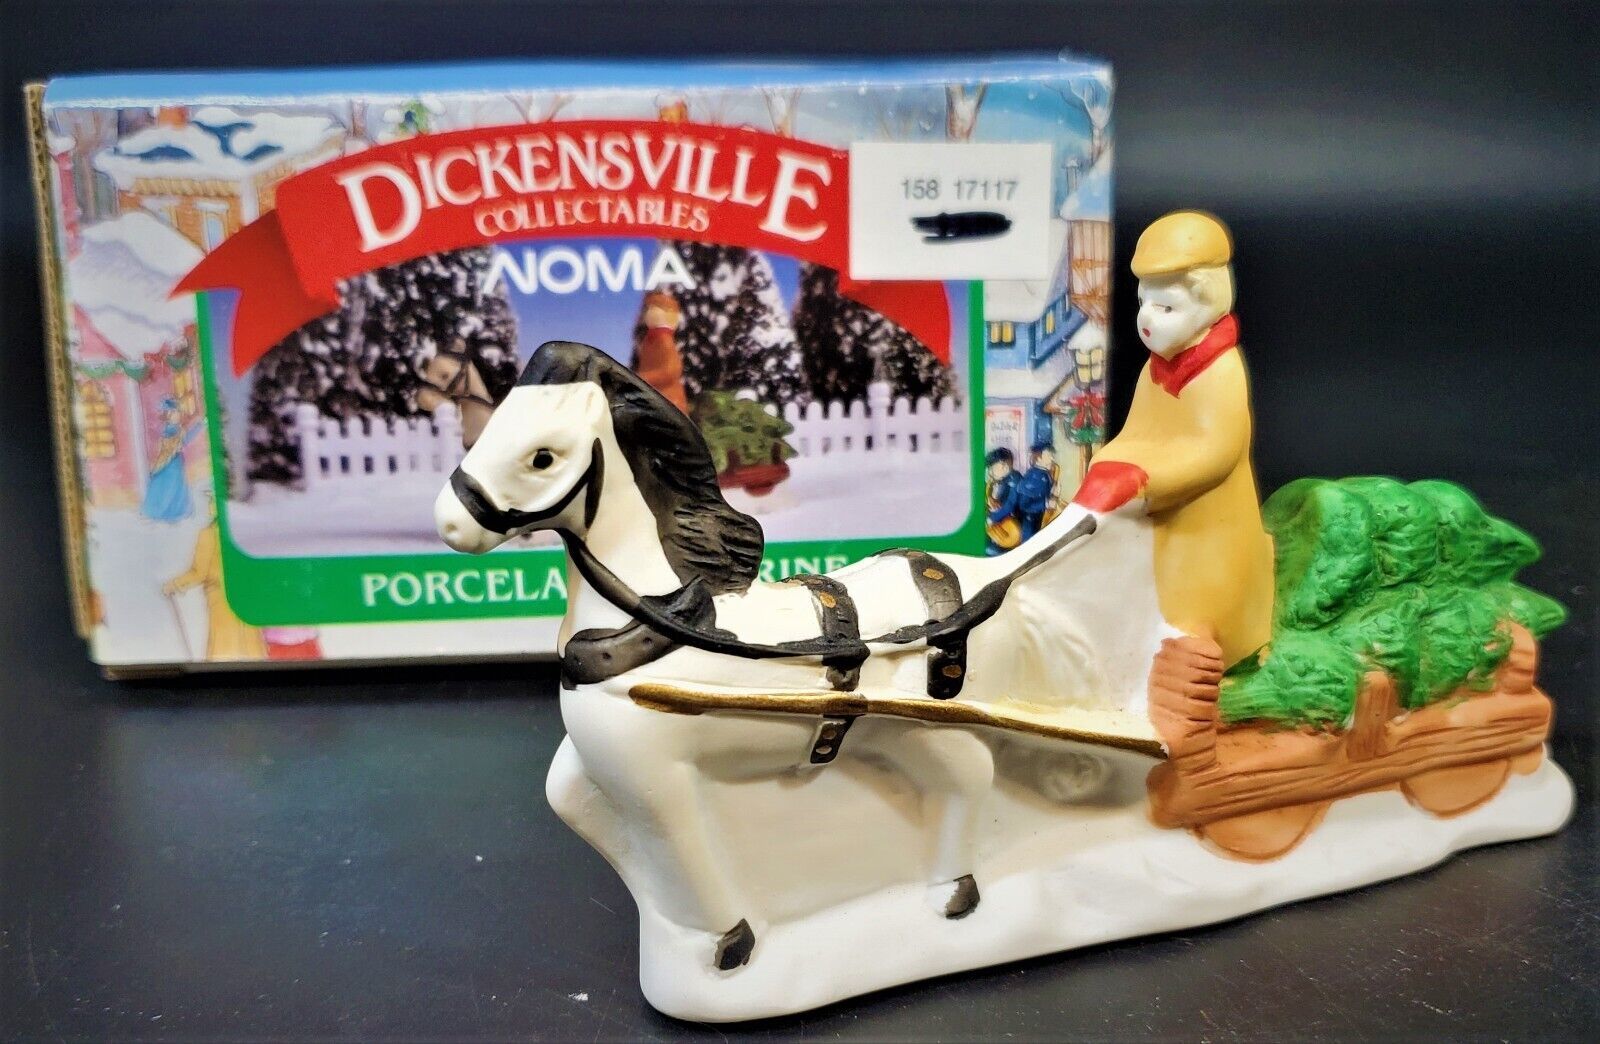 DICKENSVILLE COLLECTABLES 1991 Bringing Home a Tree Porcelain Figurine NOMA 6118 - $17.81